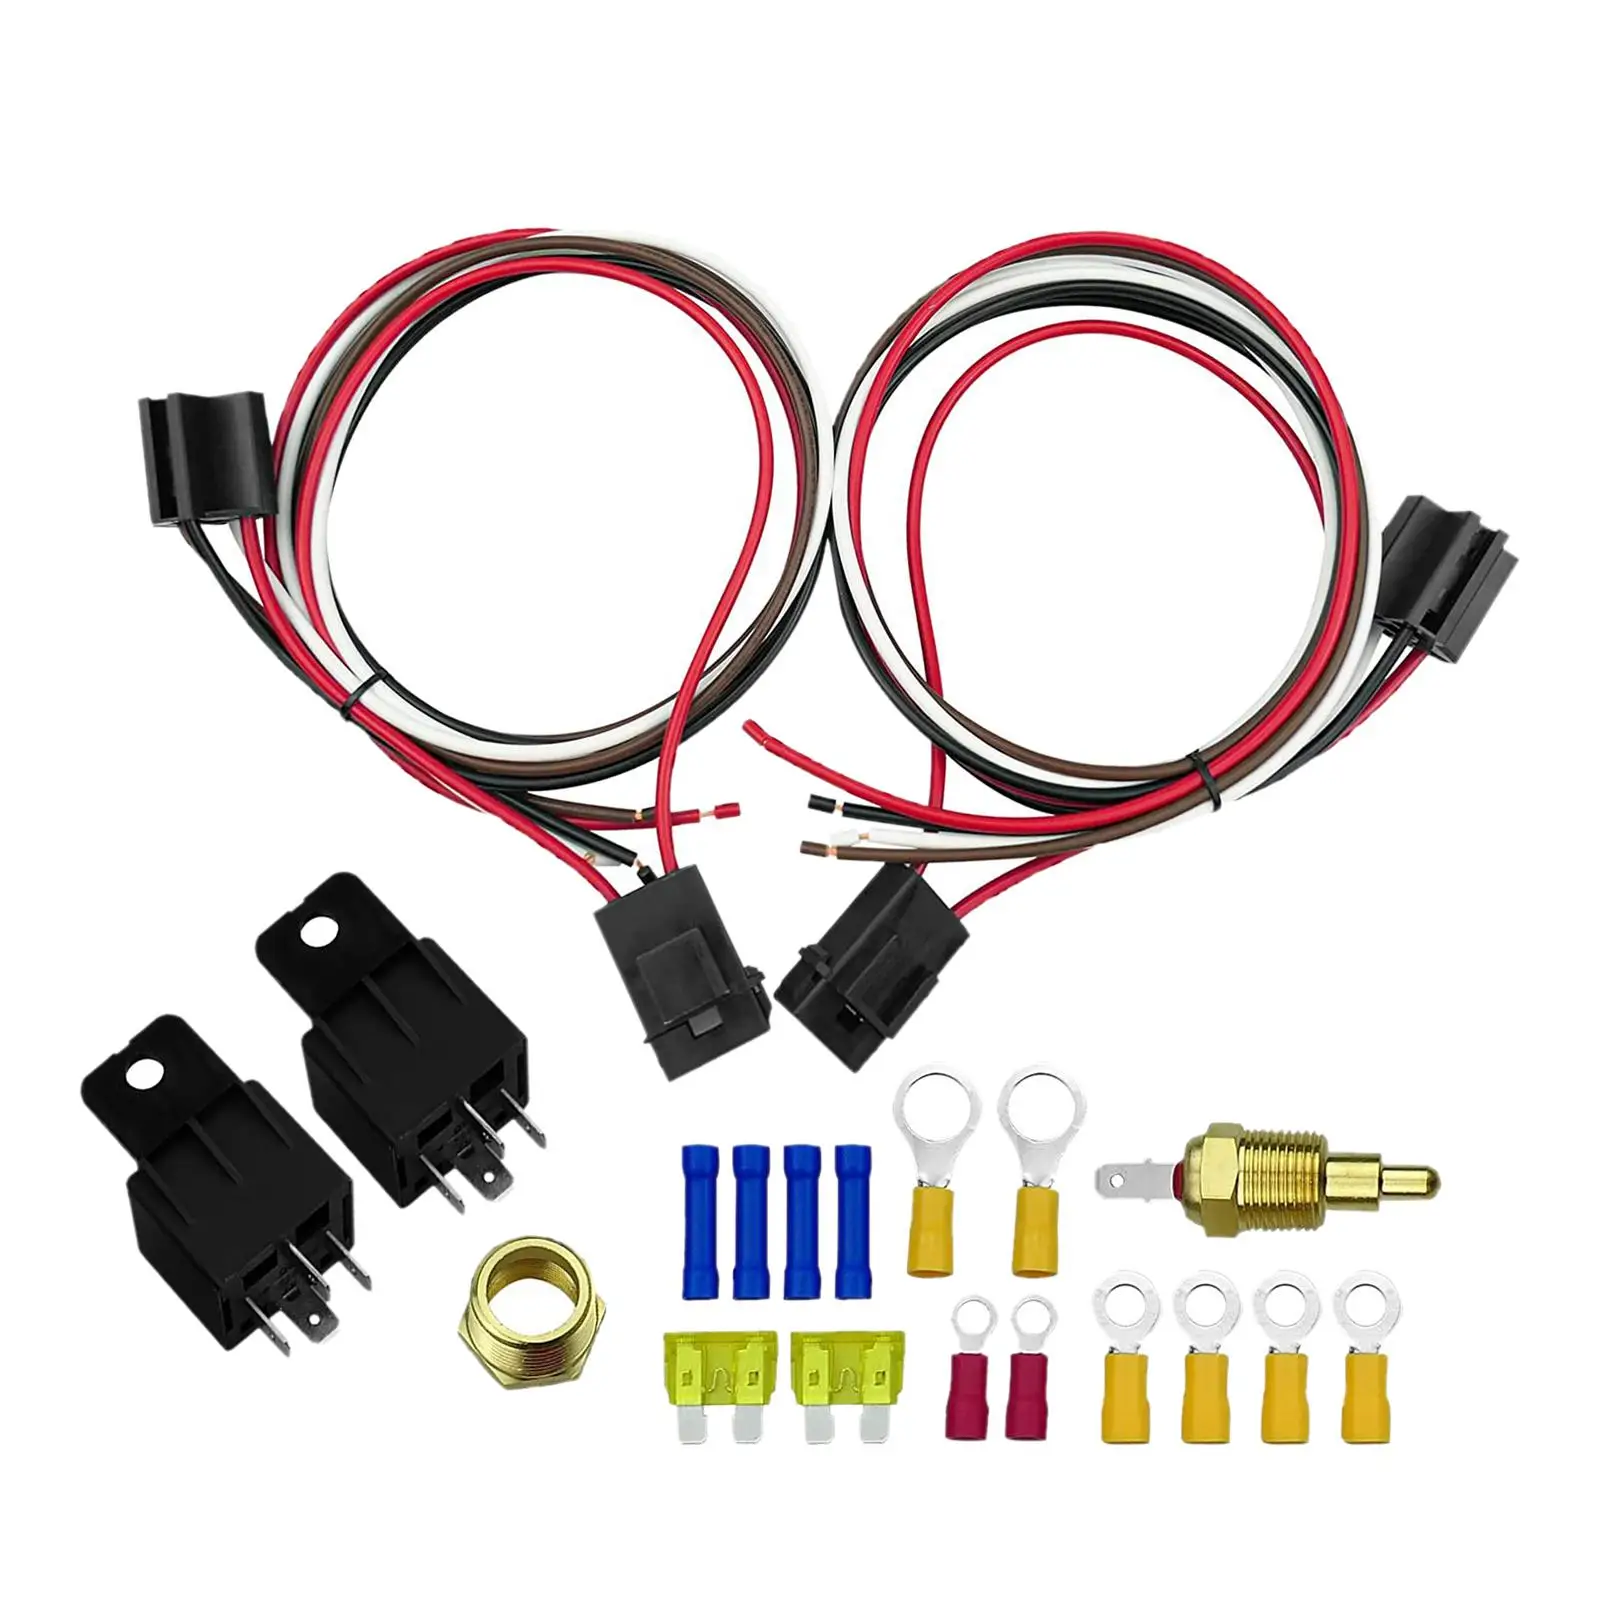 Auto Dual Electric Cooling Harness Kit 185 On 175 Off 40 Amp